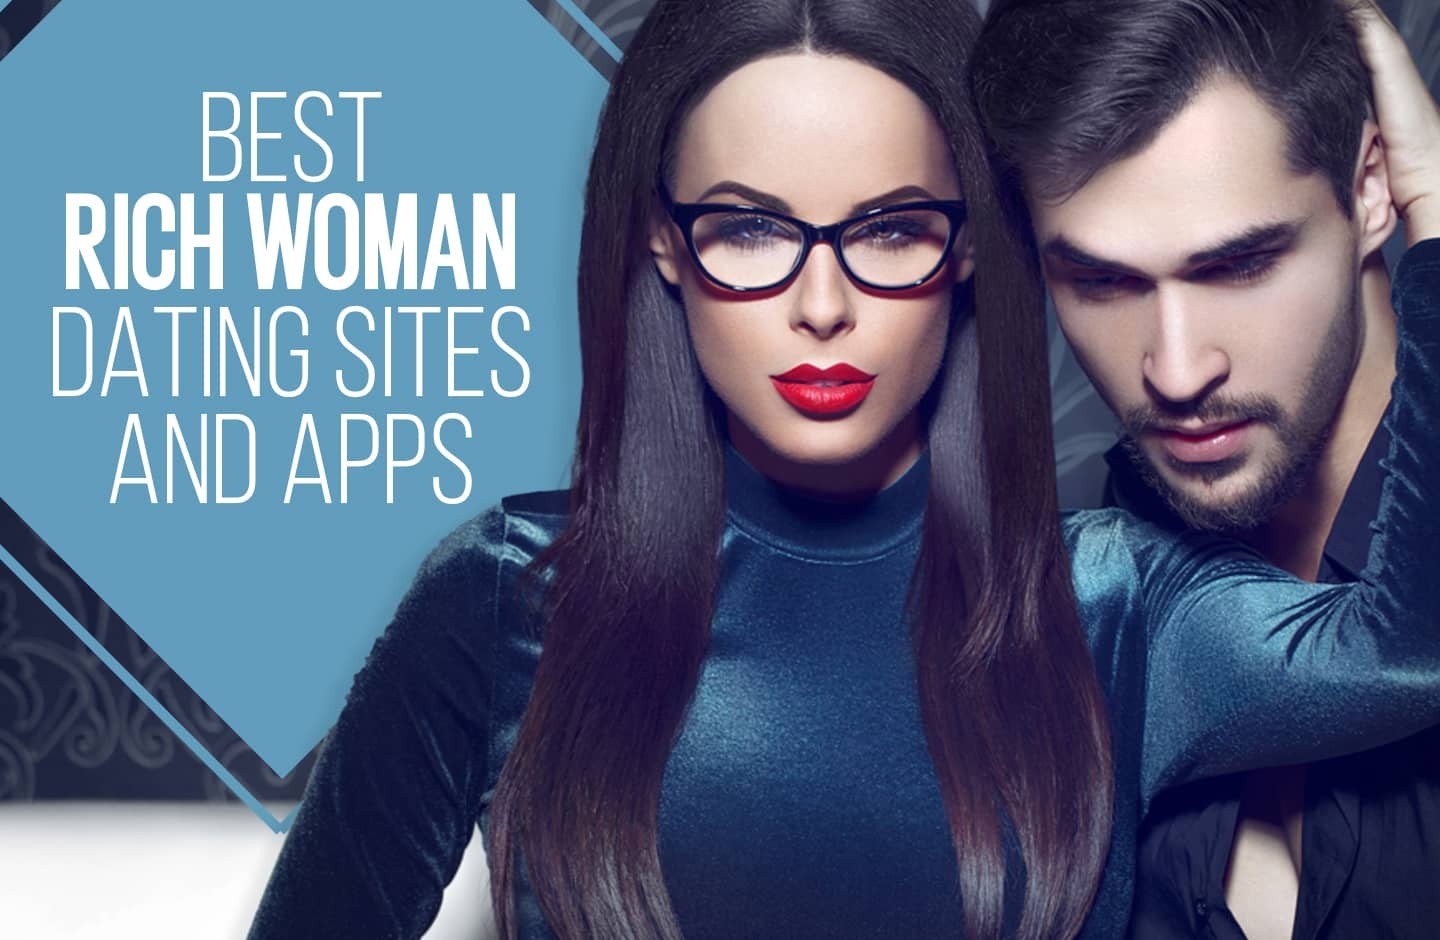 San Diego's Best Dating Apps & Sites For Singles (From the Experts)